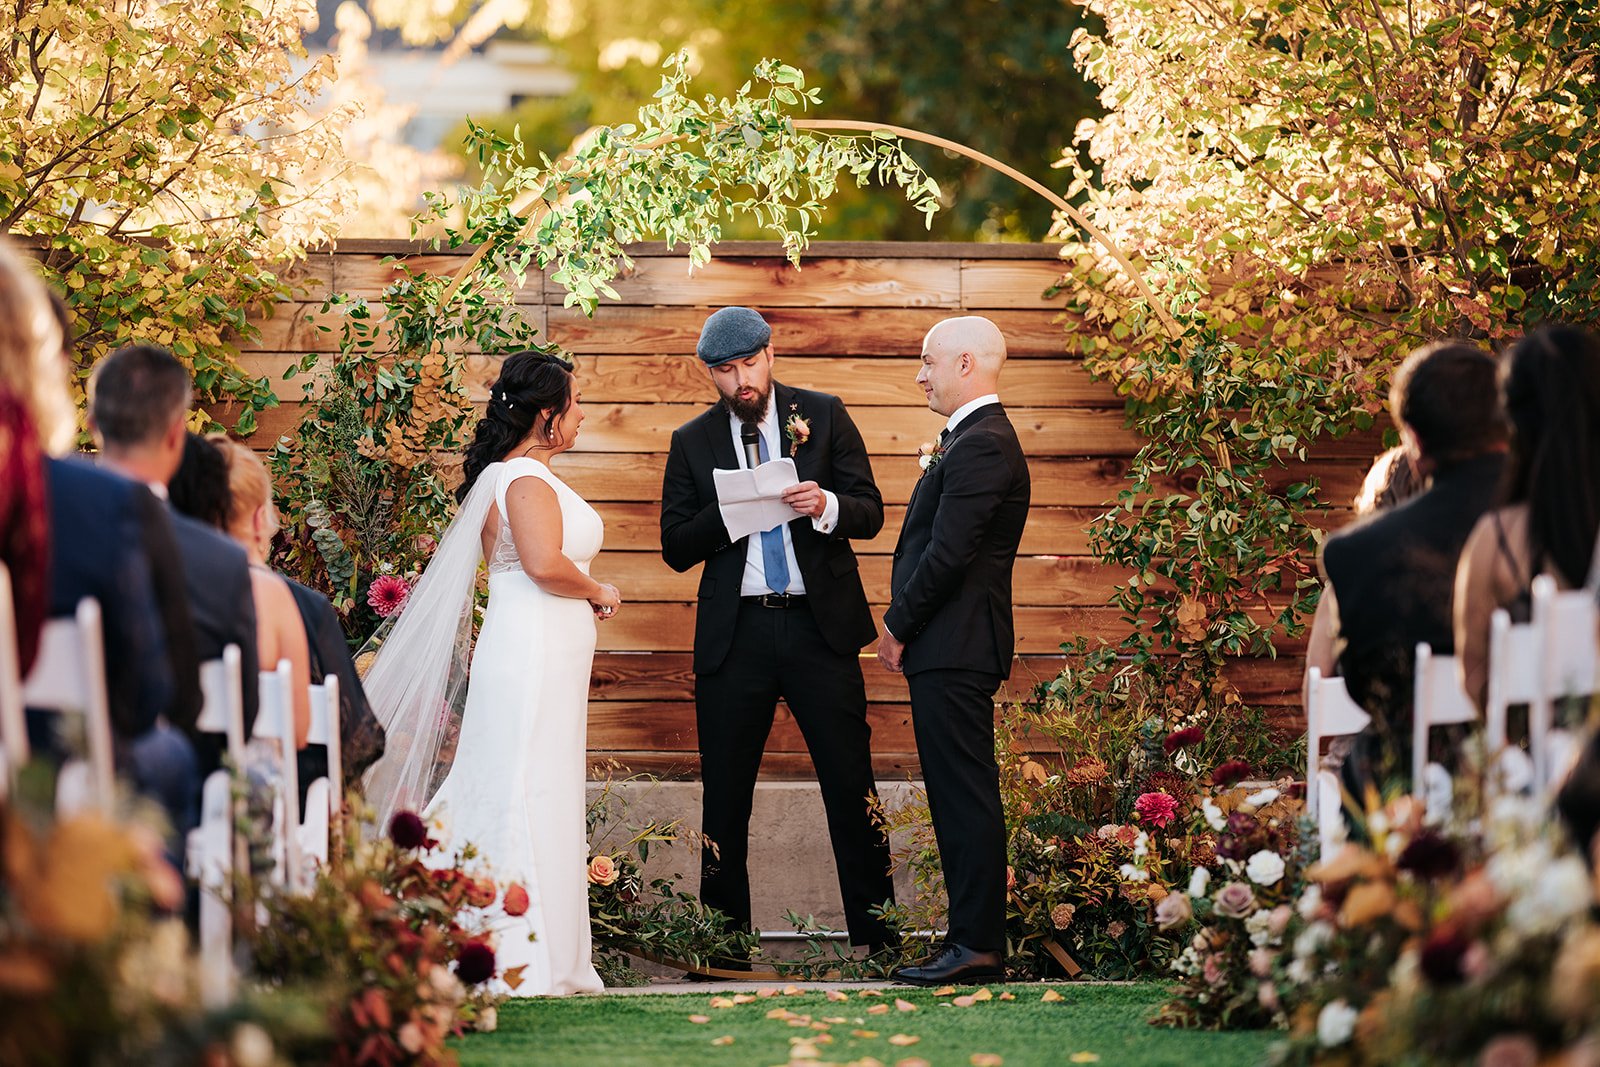 Couple getting married in front of circular arch in courtyard of the St Vrain wedding venue, Colorado